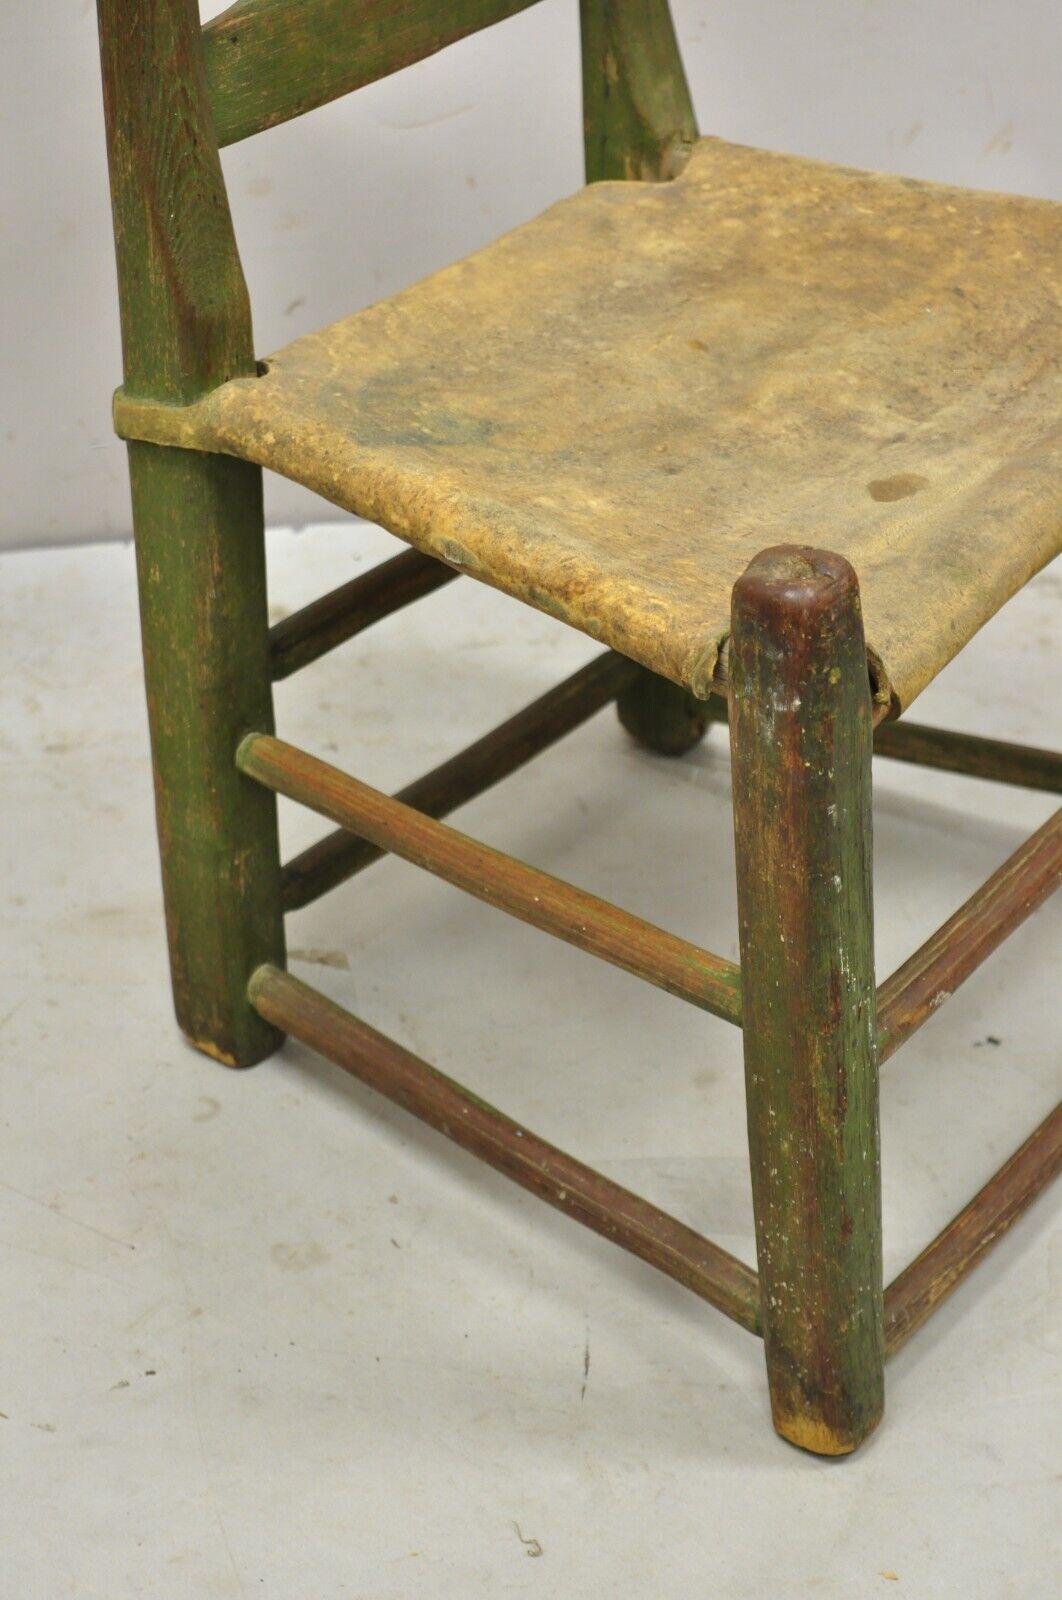 19th Century Antique Small Ladder Back Green Primitive Rustic Chair with Deer Hide Seat For Sale